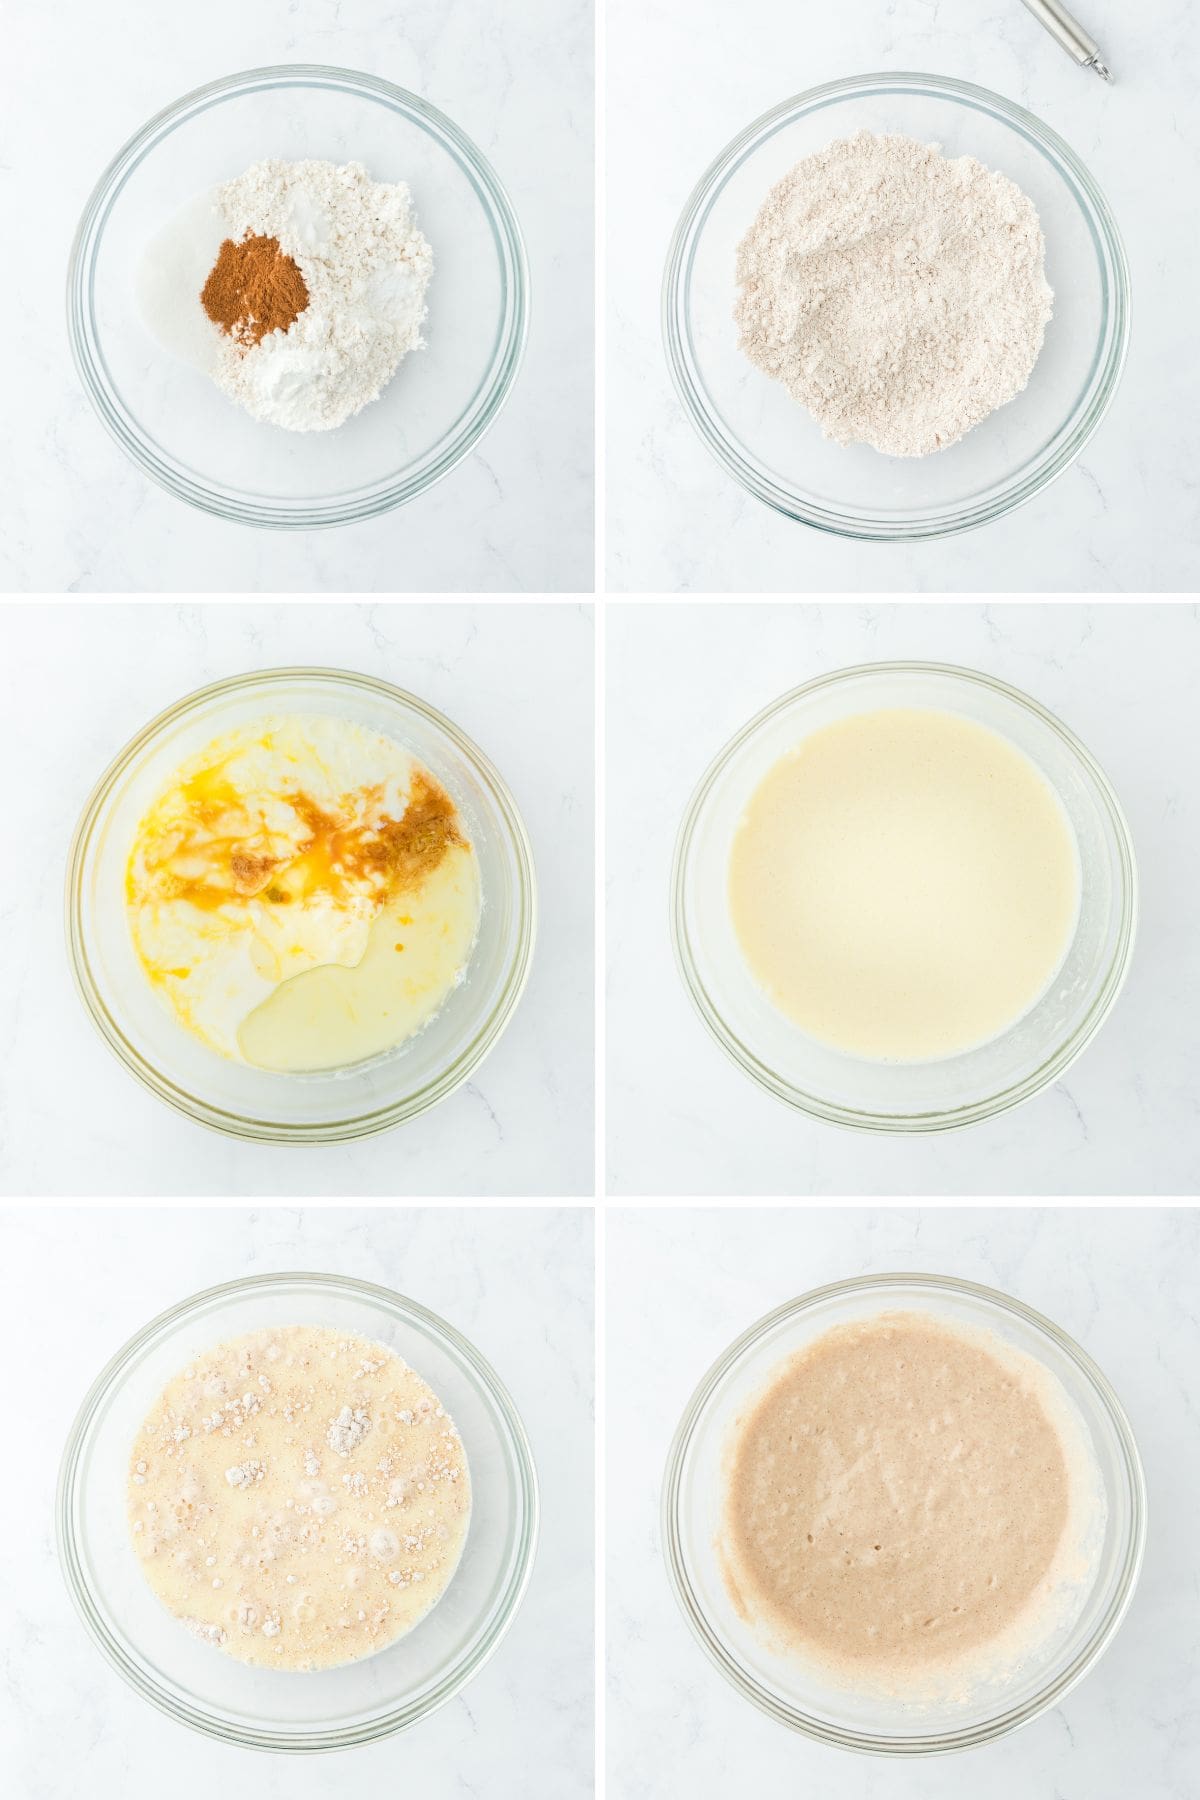 A collage of images showing the process of making the pancake batter.